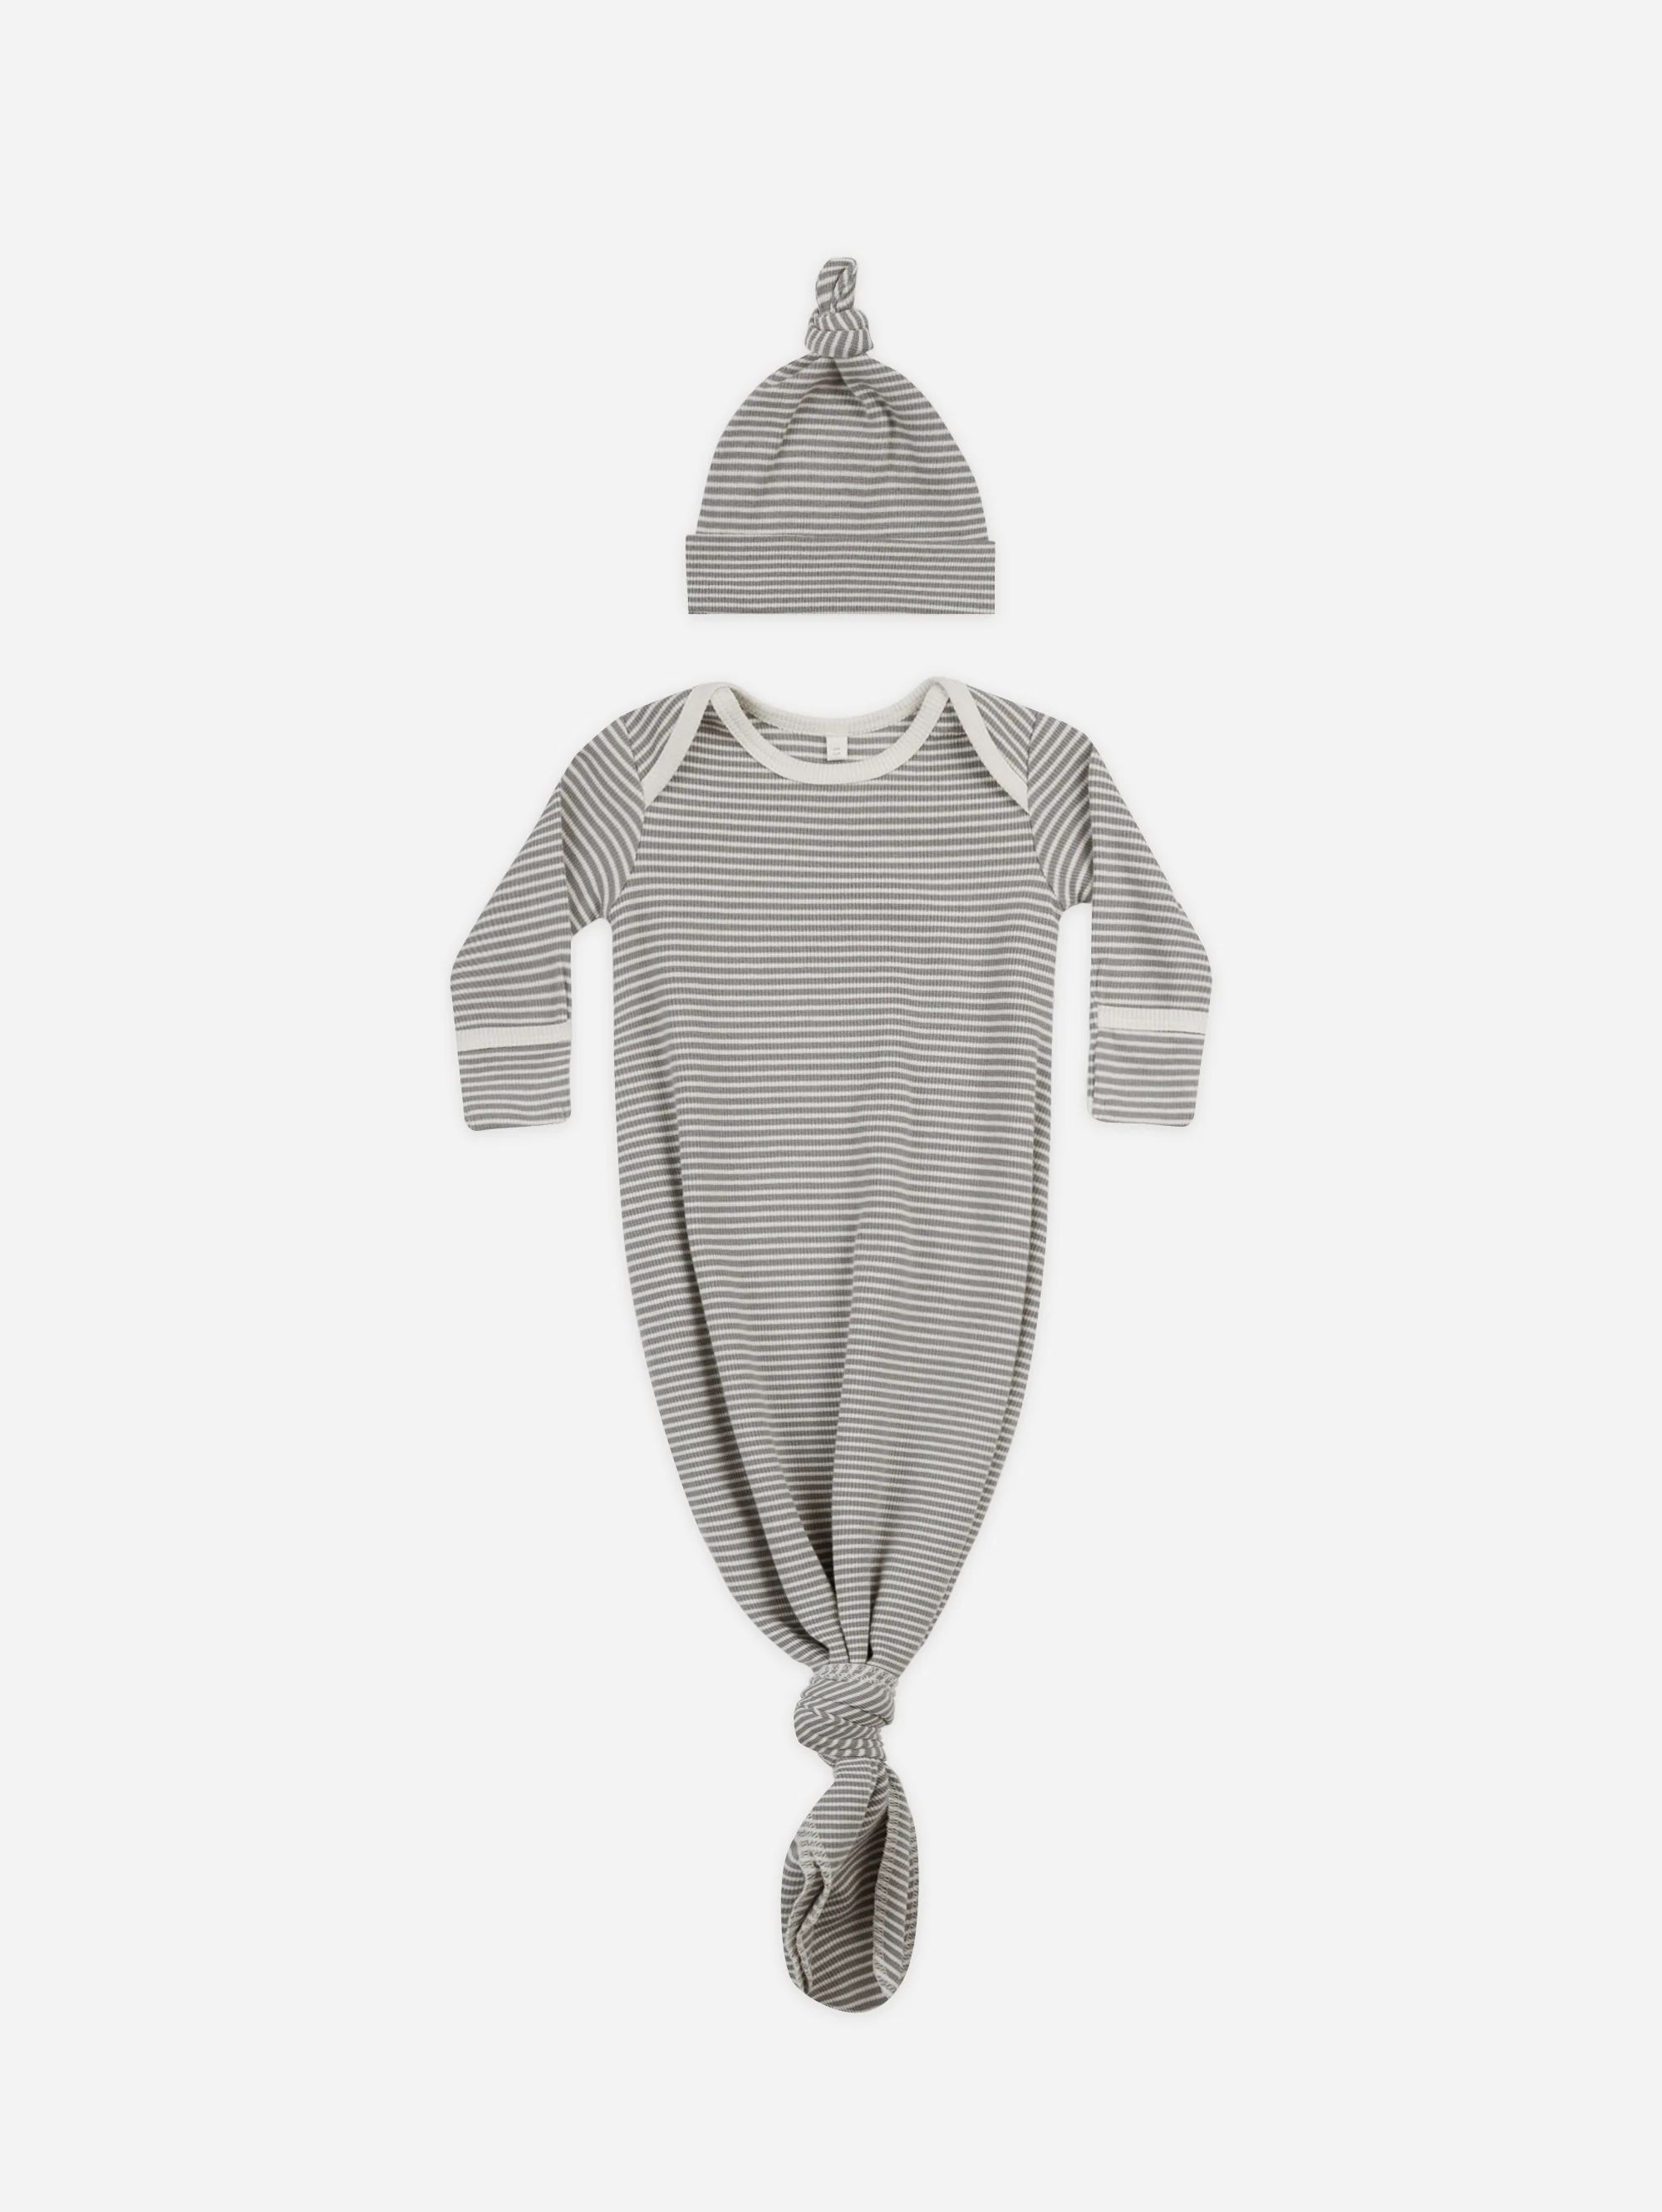 Knotted Baby Gown + Hat Set || Lagoon Micro Stripe | Rylee + Cru